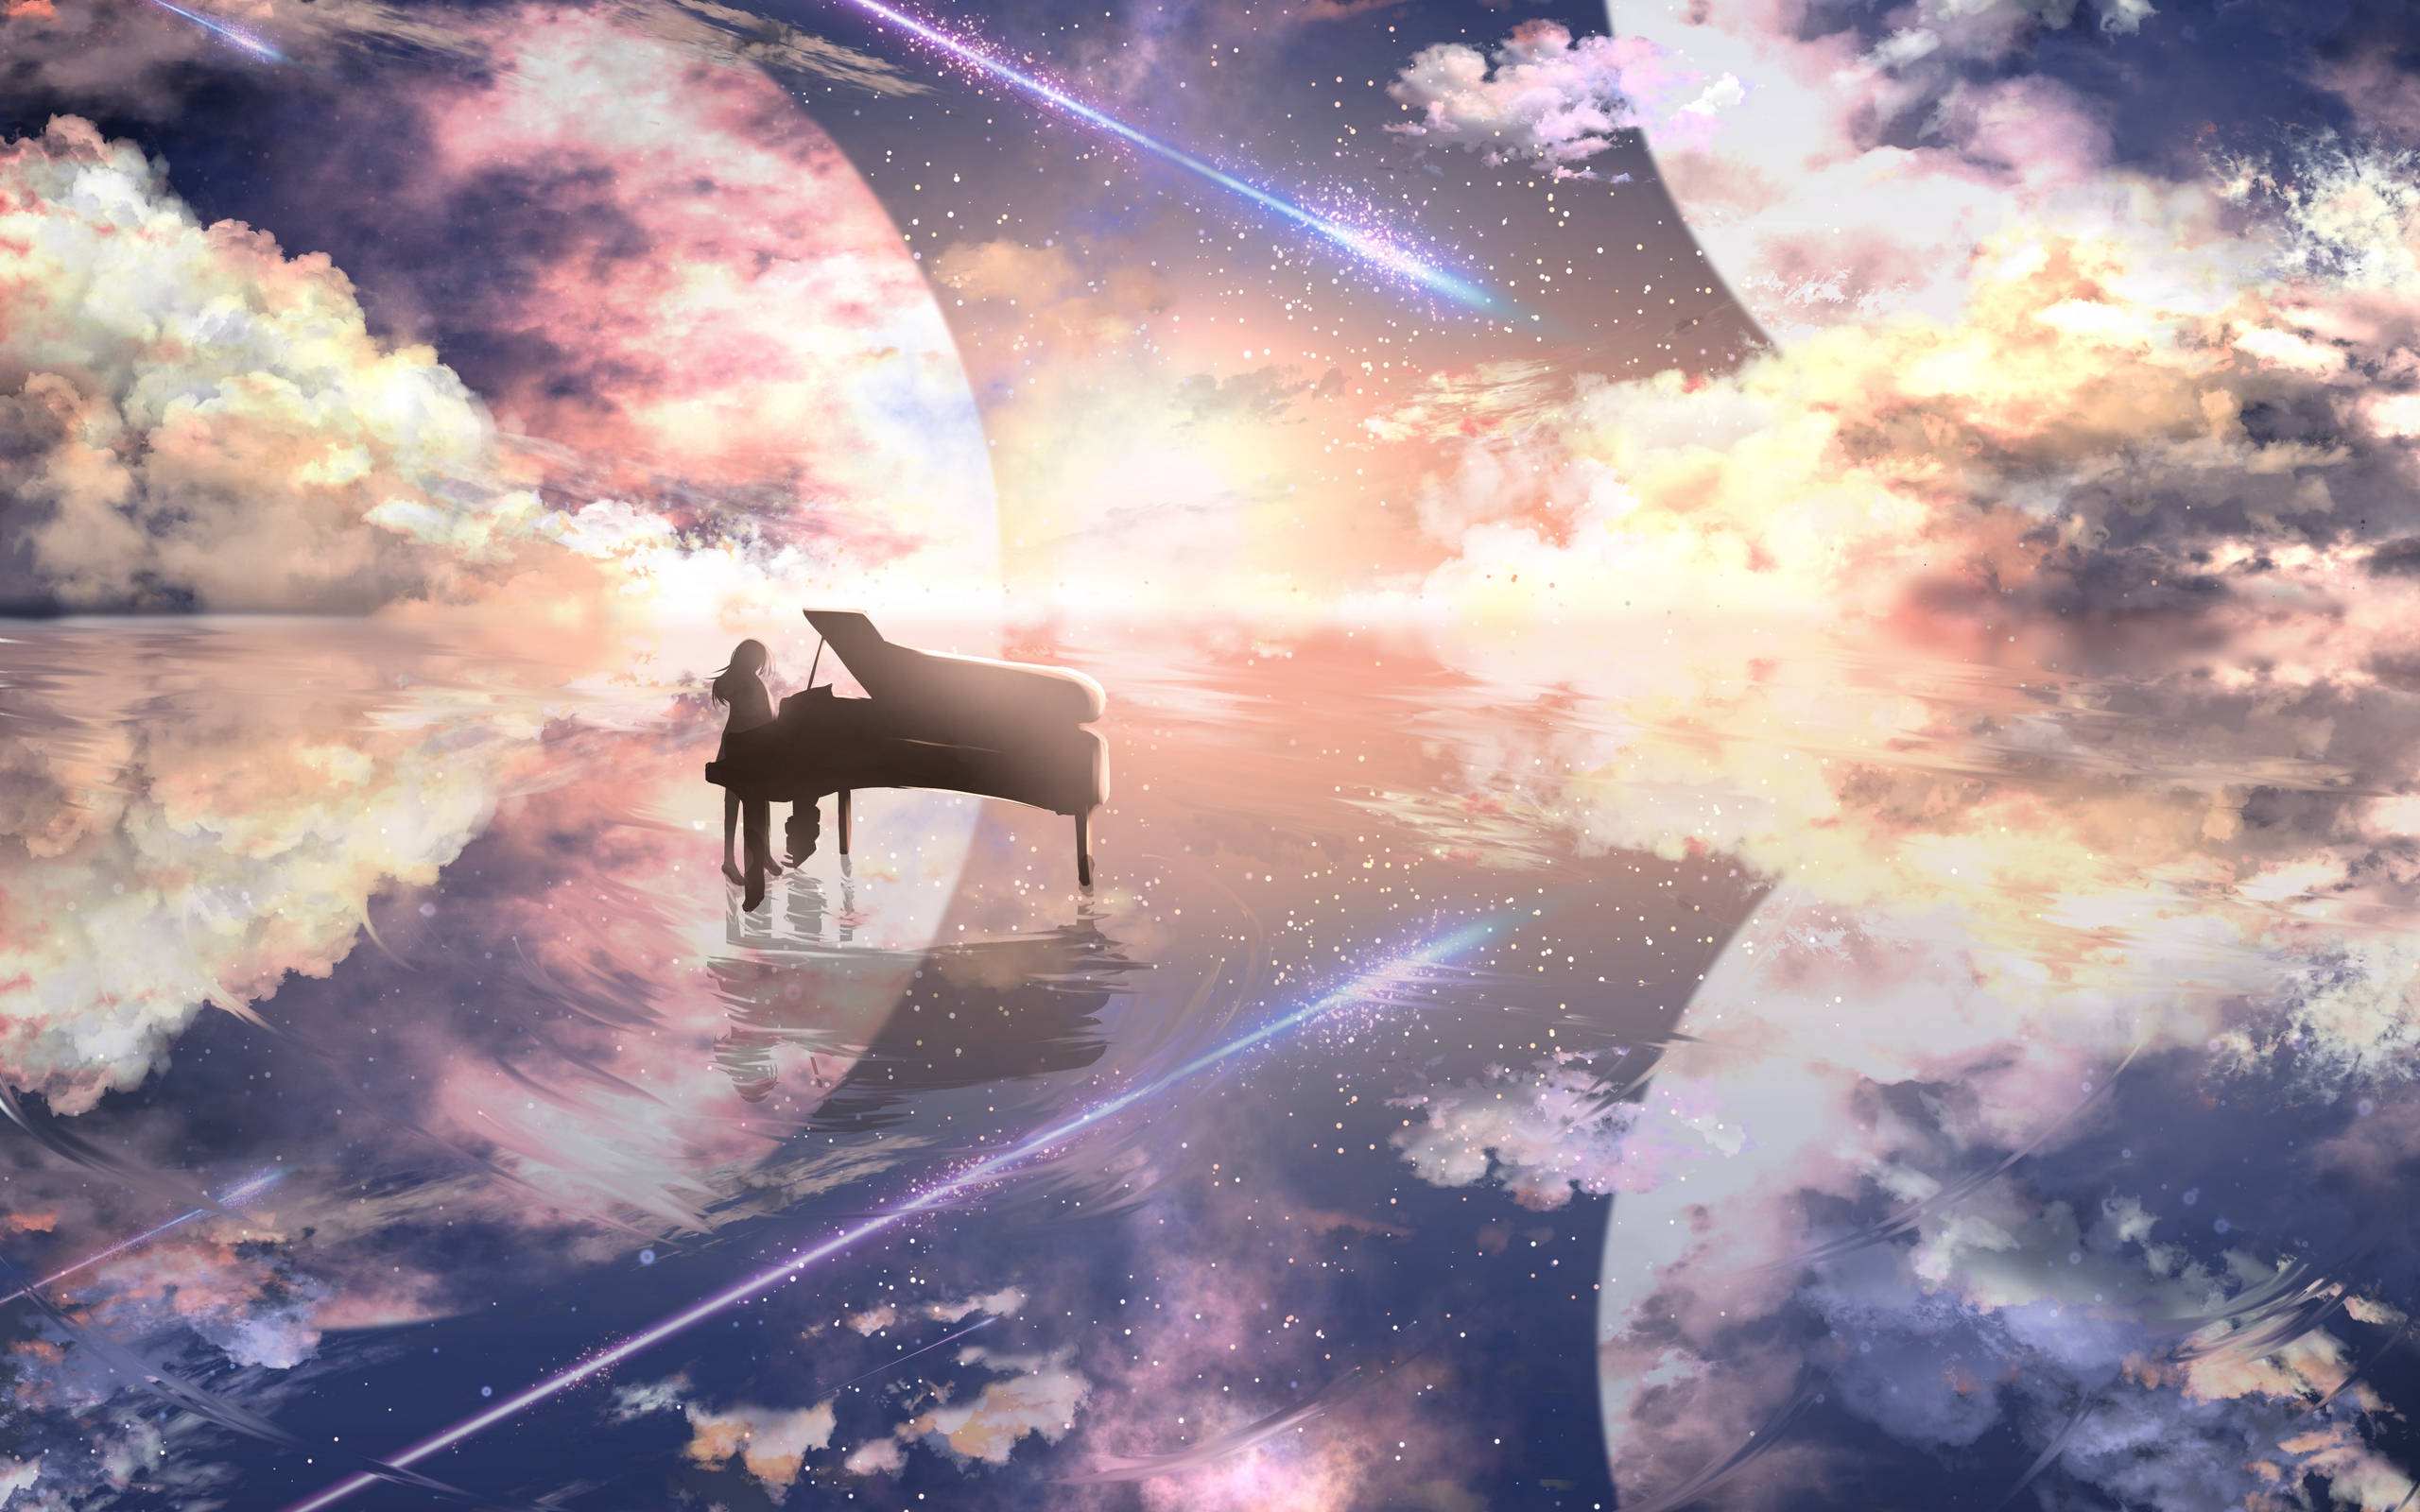 Piano On An Anime Planet Wallpaper